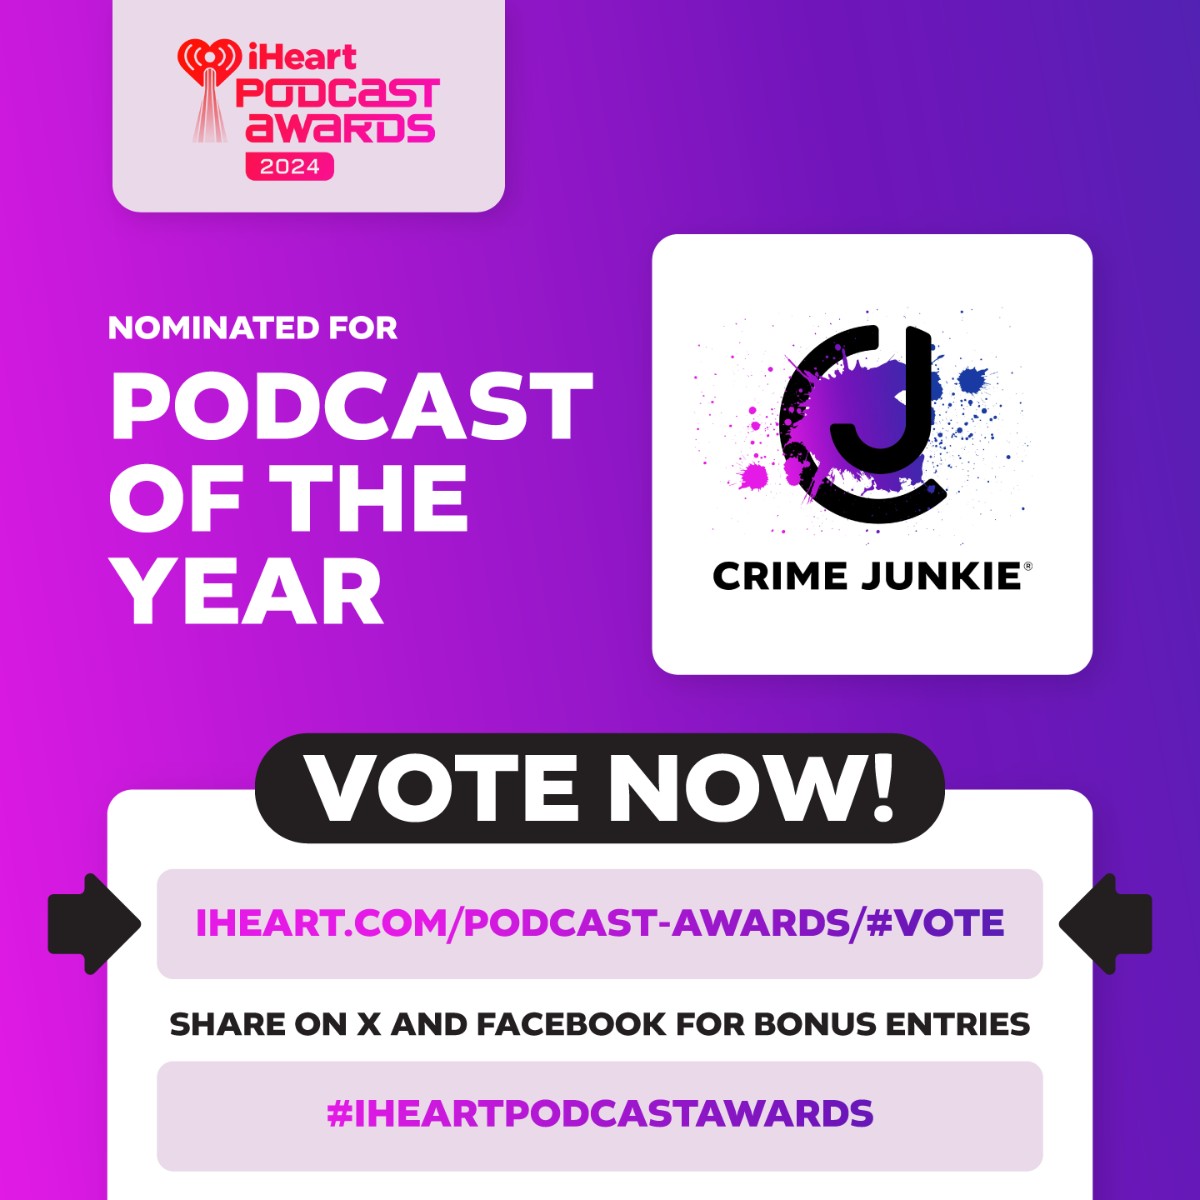 Crime Junkie is up for iHeart’s Podcast of the Year Award! First, THANK YOU 💜 None of this would happen without YOU! Second… you can vote here: iheart.com/podcast-awards… Share your vote here on X after you're done for bonus entries! Be sure to include #IHEARTPODCASTAWARDS! 🤩✨